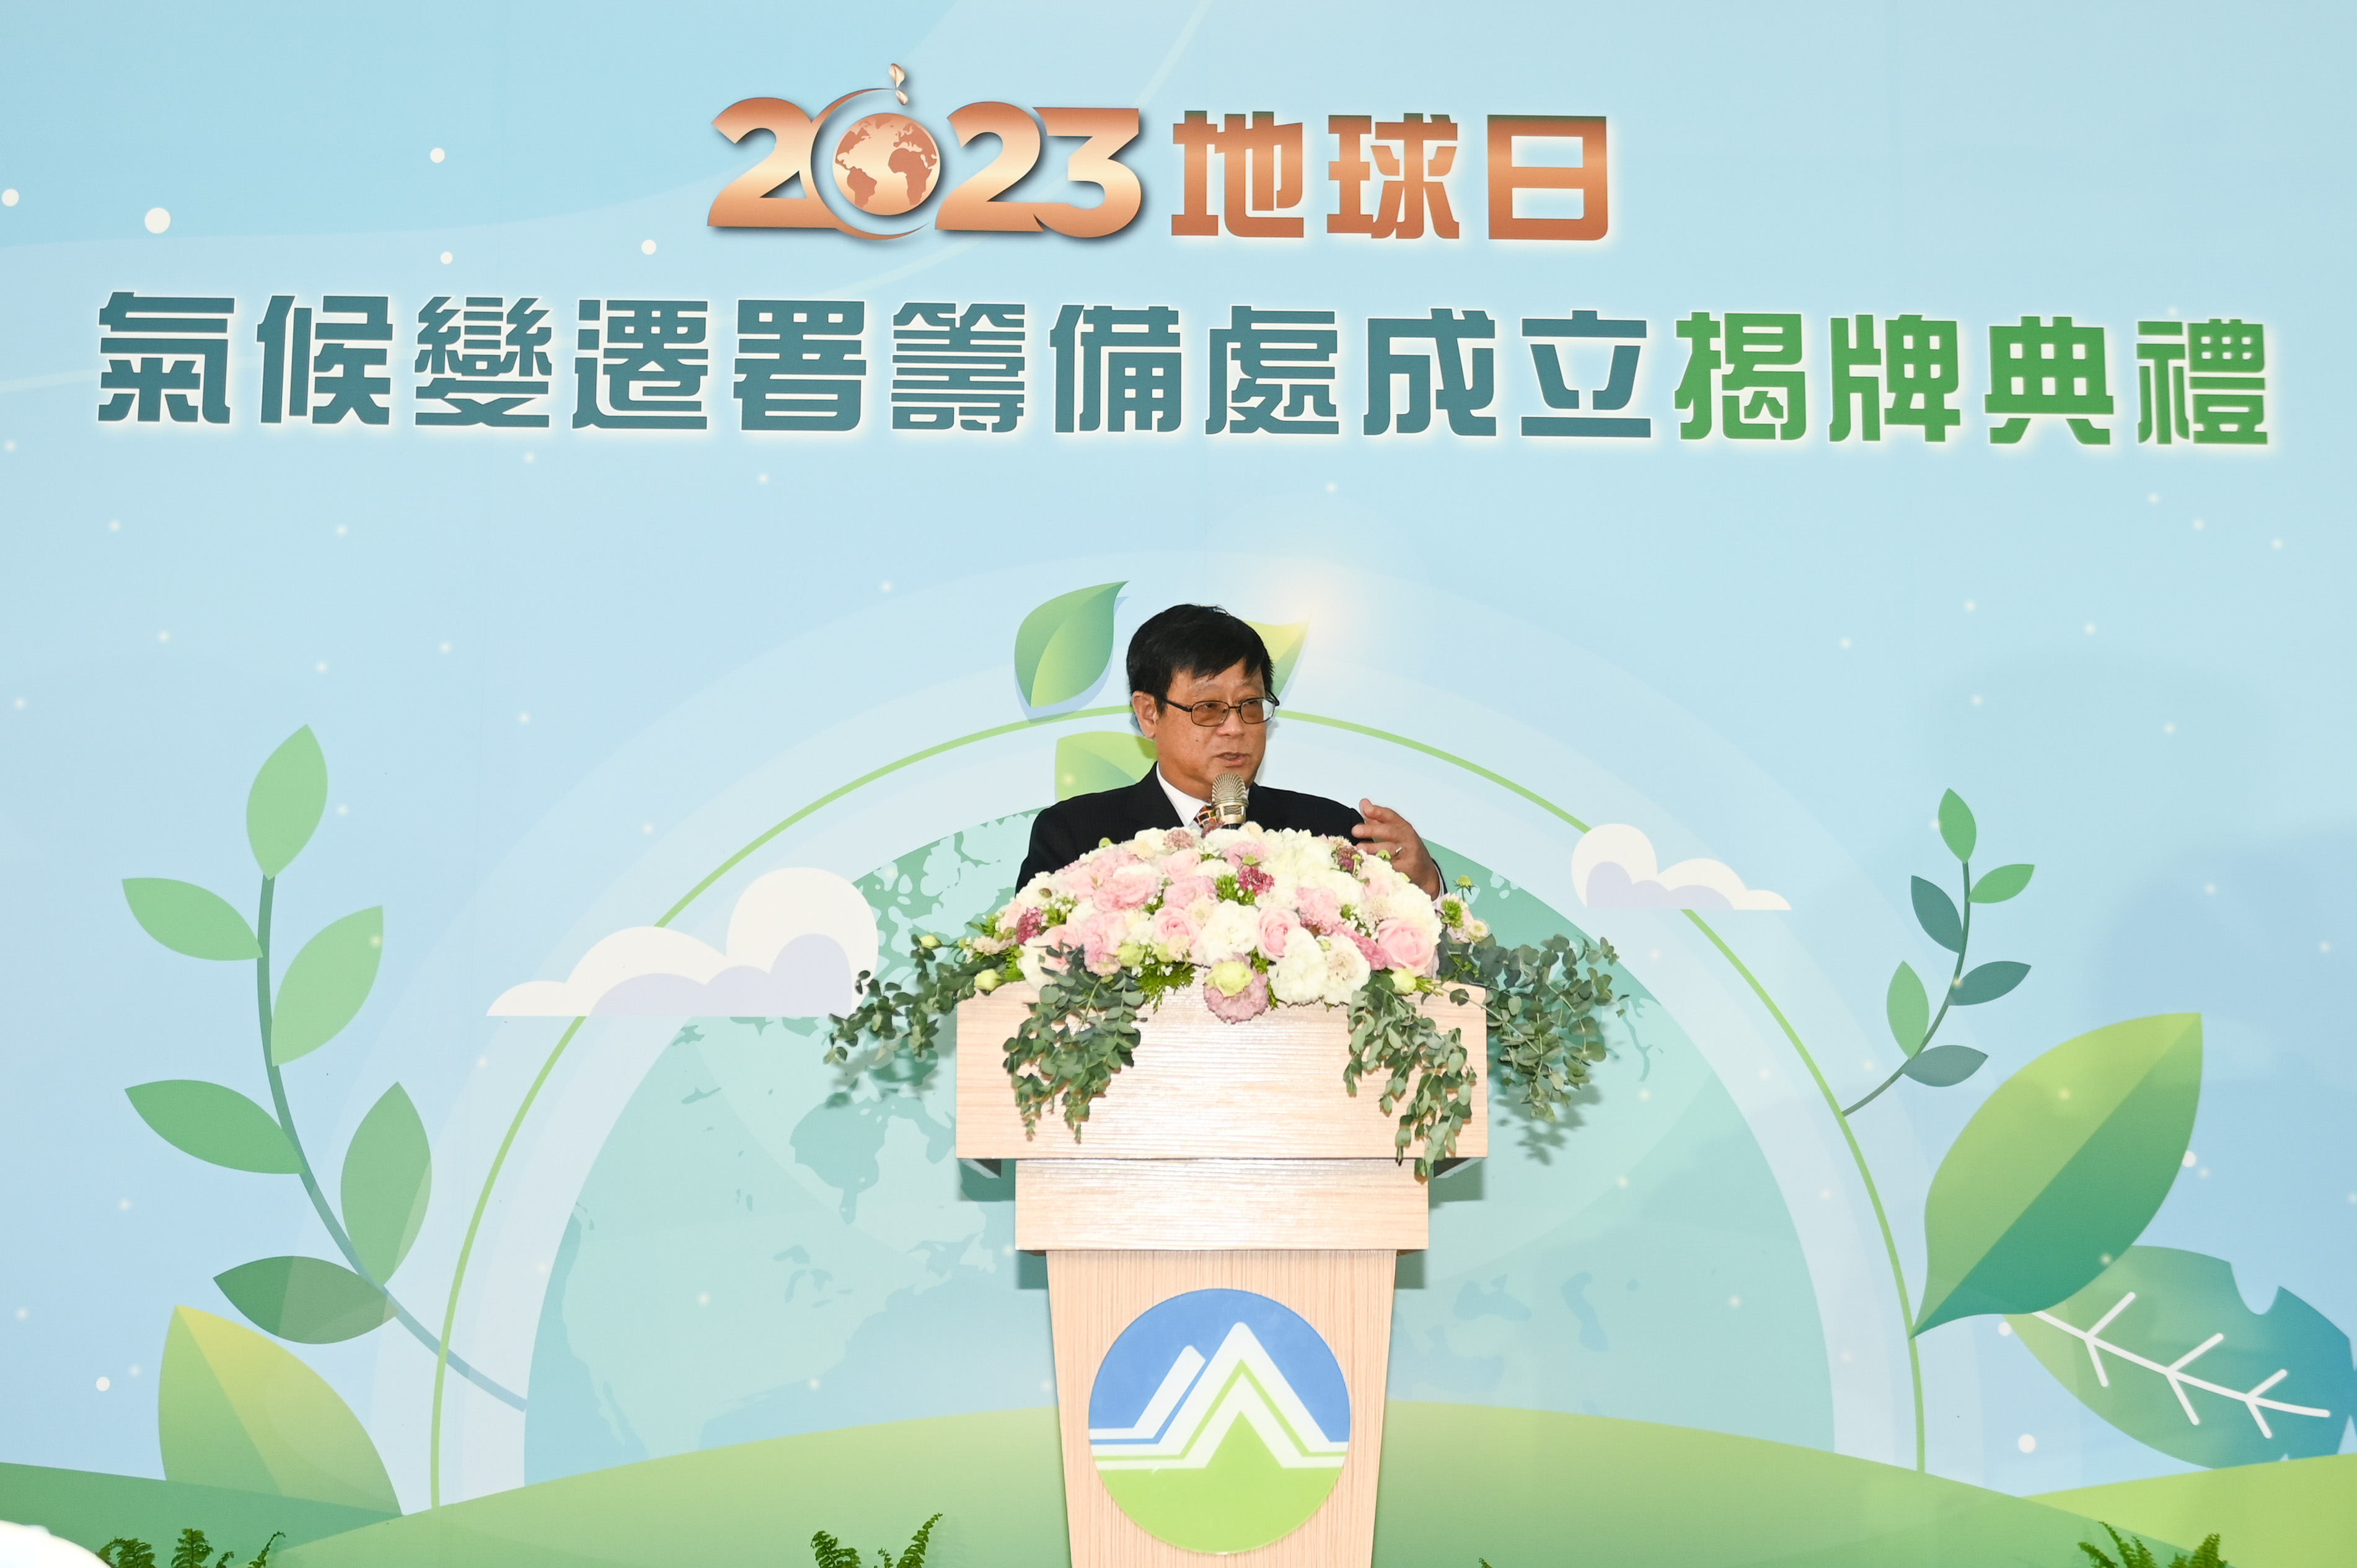 Taiwan EPA Minister Chang Tzi-Chin stated that the establishment of the “Preparatory Office of the Climate Change Agency (the POCCA)” is to supplement the manpower required for urgent business and follow the preparatory work of the Climate Change Agency.